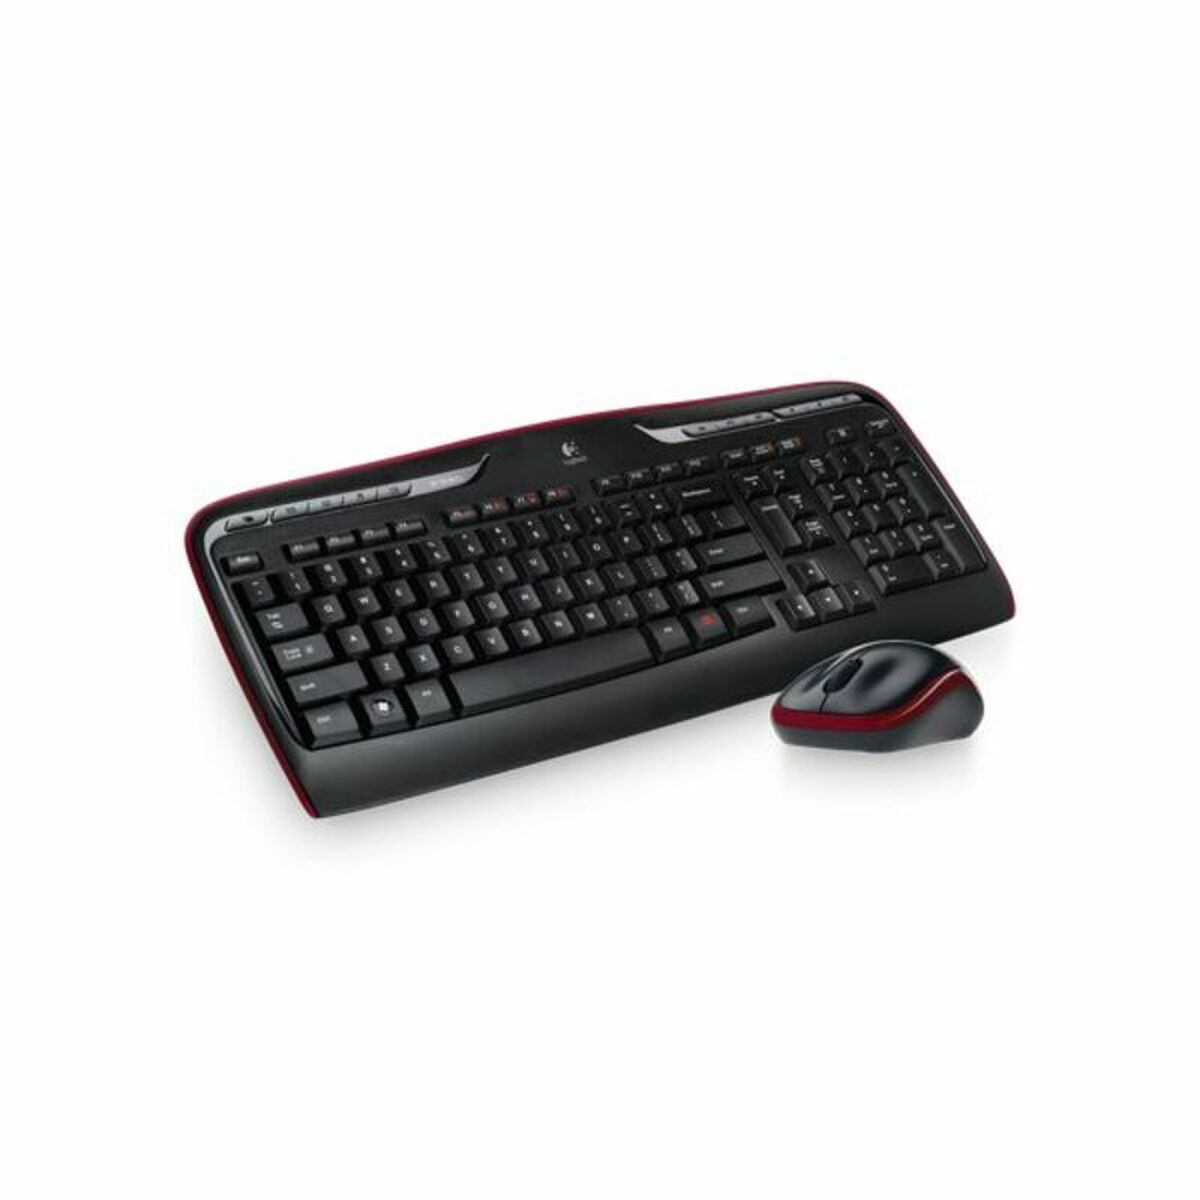 Keyboard and Wireless Mouse Logitech MK330 Black, Logitech, Computing, Accessories, keyboard-and-wireless-mouse-logitech-mk330-black, :QWERTY, :Spanish, Brand_Logitech, category-reference-2609, category-reference-2642, category-reference-2646, category-reference-t-19685, category-reference-t-19908, category-reference-t-21353, computers / peripherals, Condition_NEW, office, Price_50 - 100, Teleworking, RiotNook